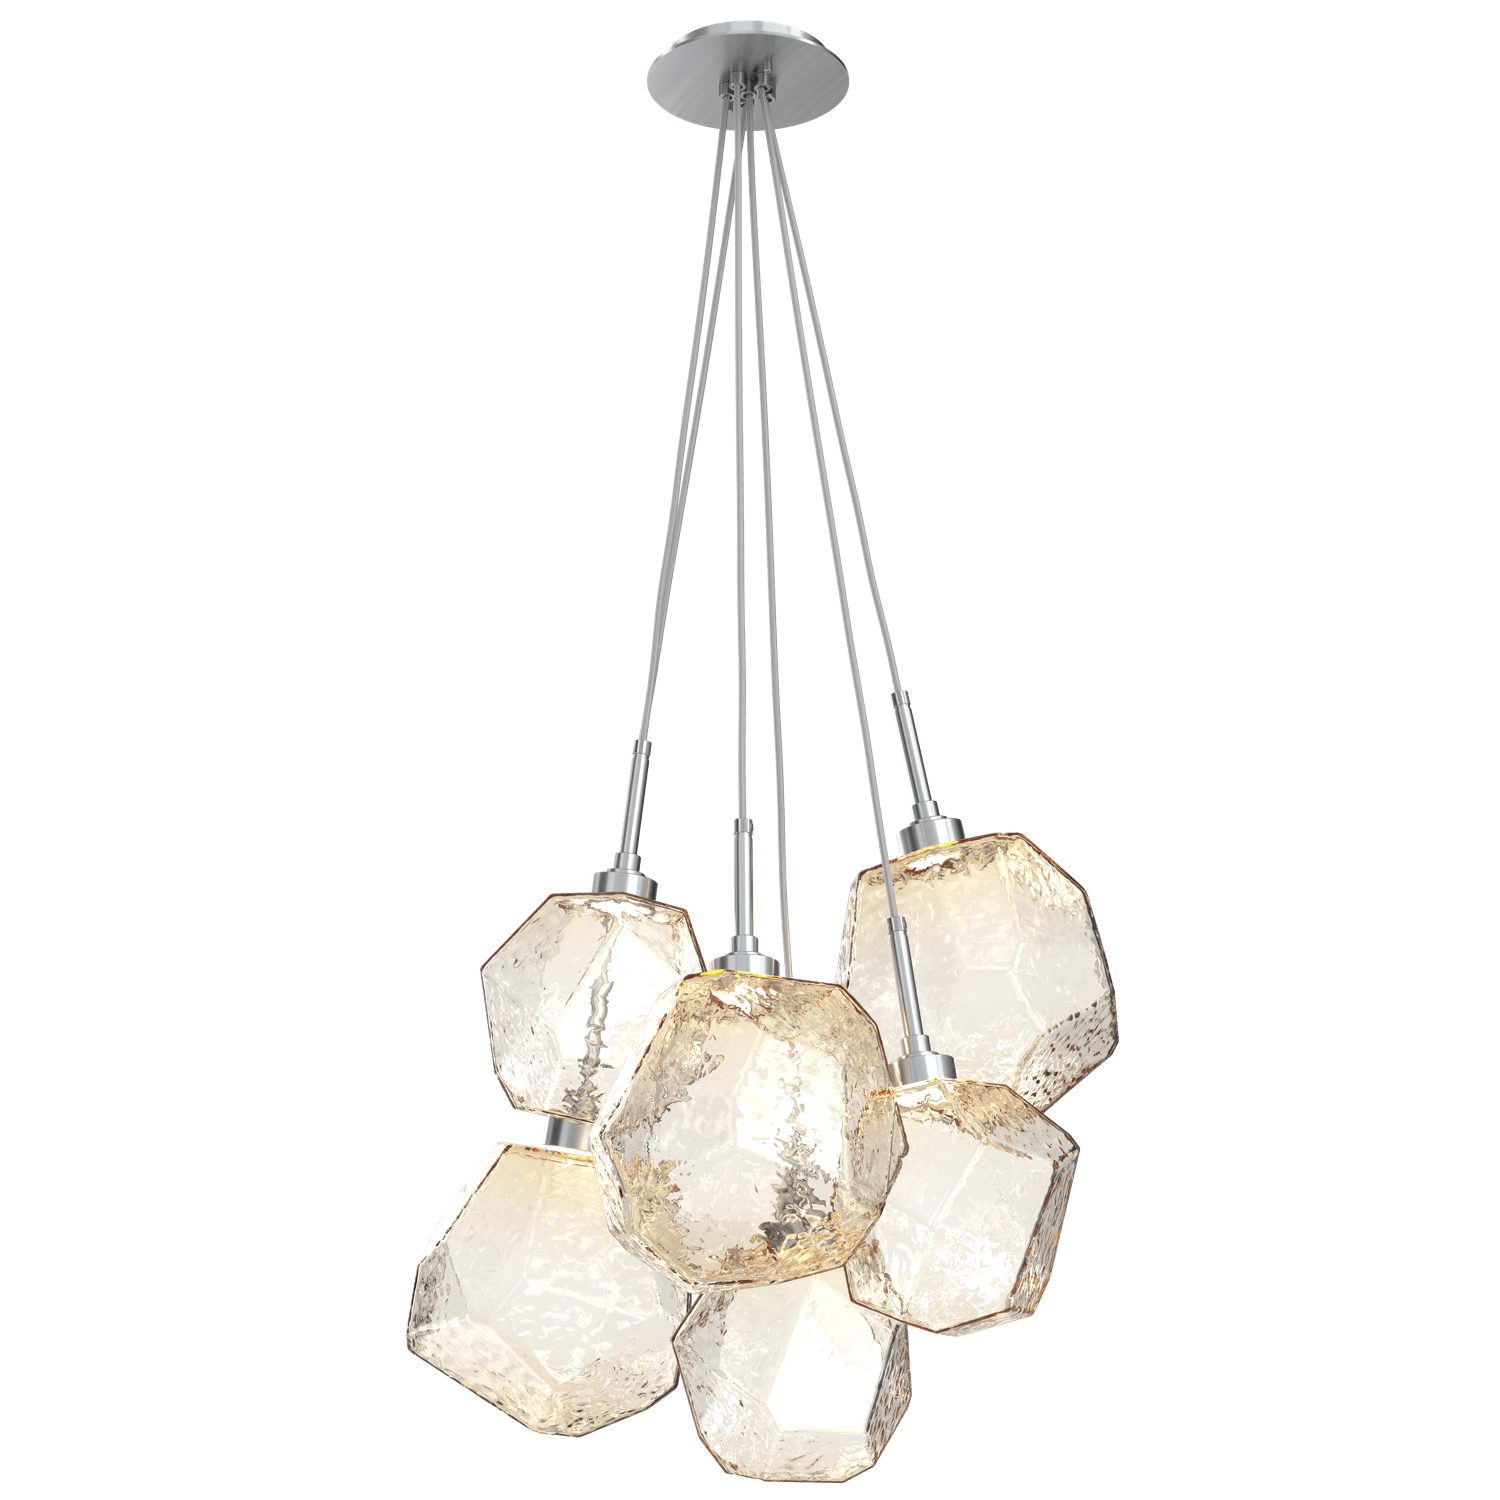 CHB0039-0F-SN-A-Hammerton-Studio-Gem-6-light-cluster-pendant-light-with-satin-nickel-finish-and-amber-blown-glass-shades-and-LED-lamping